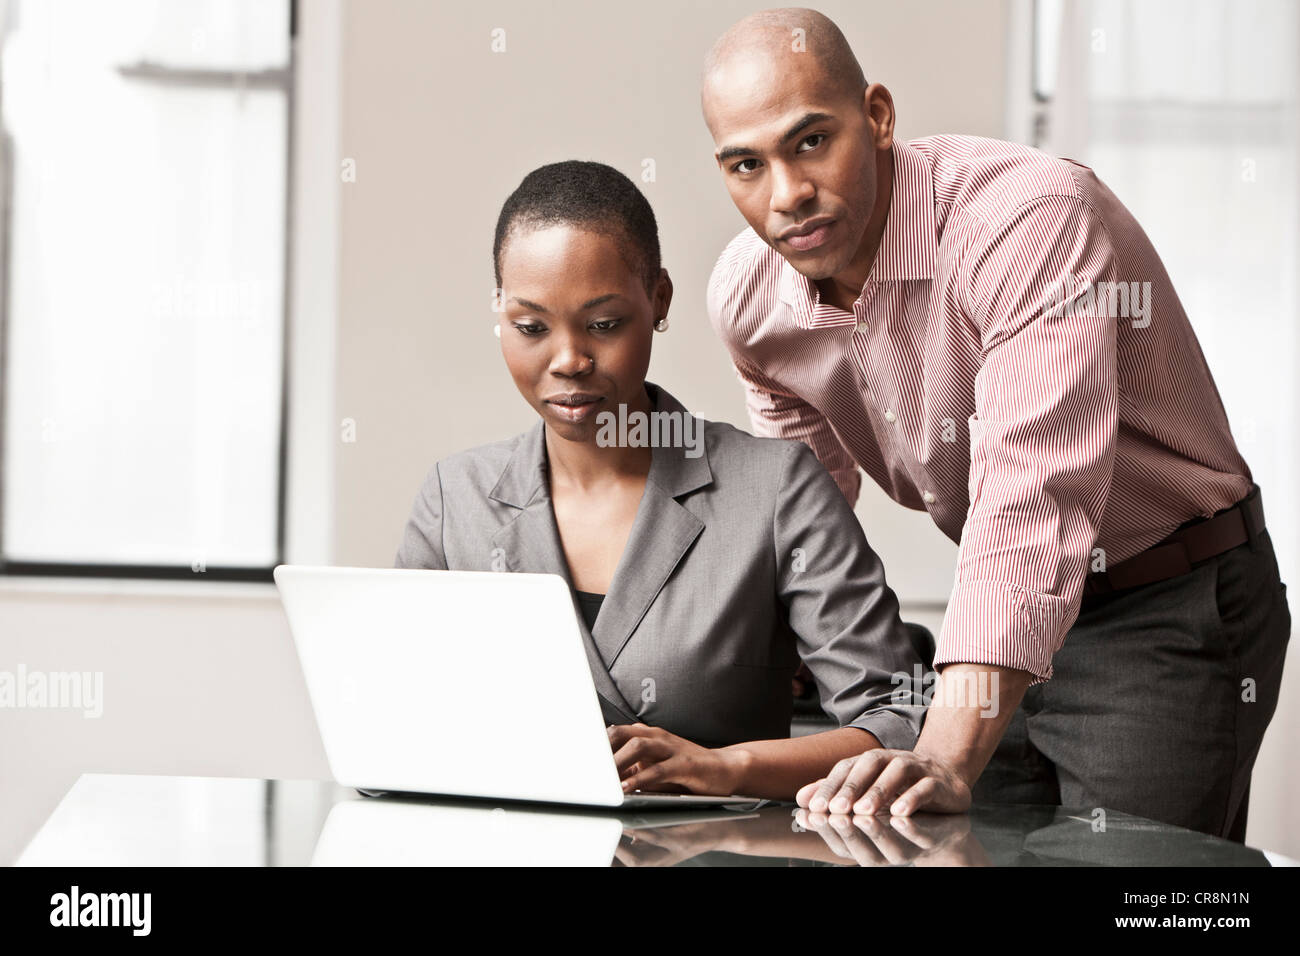 Two business colleagues using laptop Stock Photo